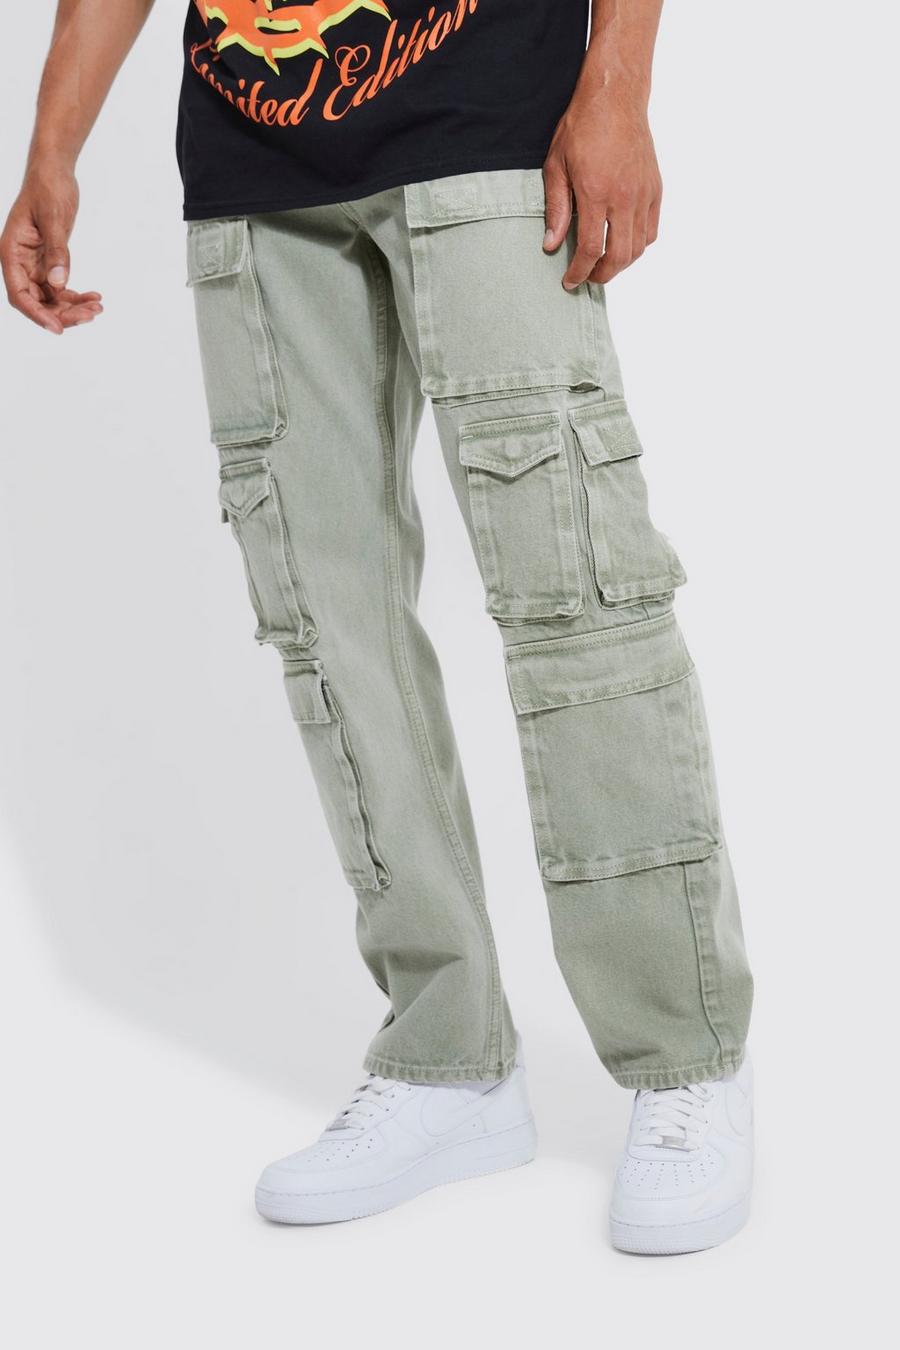 Sage Relaxed Fit Washed Multi Pocket Cargo Jeans